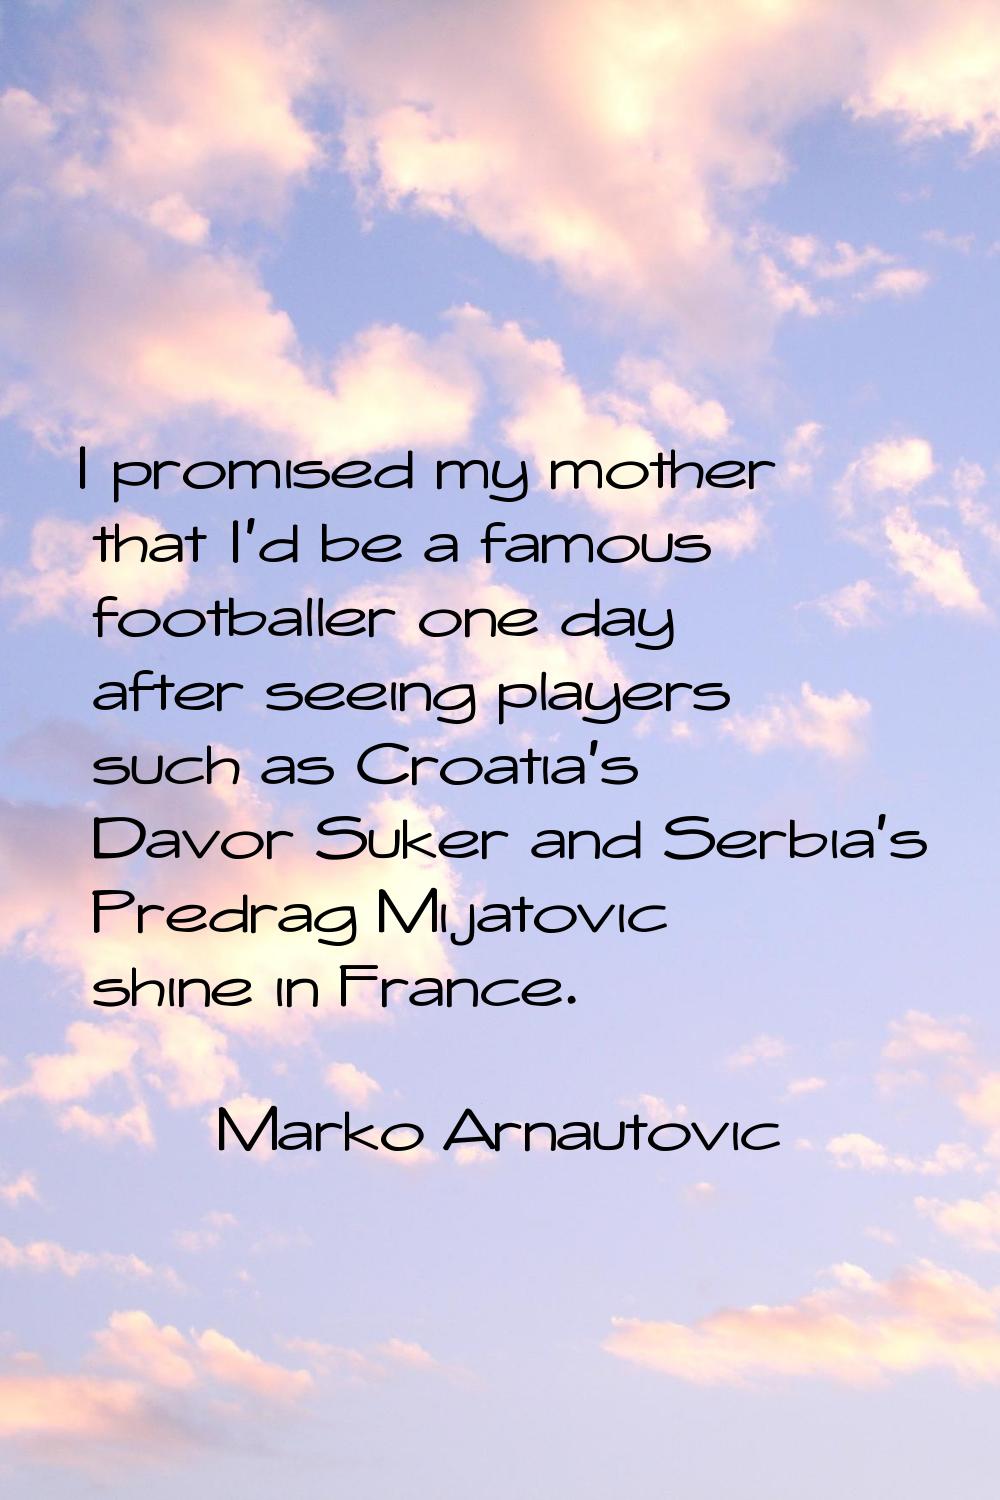 I promised my mother that I'd be a famous footballer one day after seeing players such as Croatia's